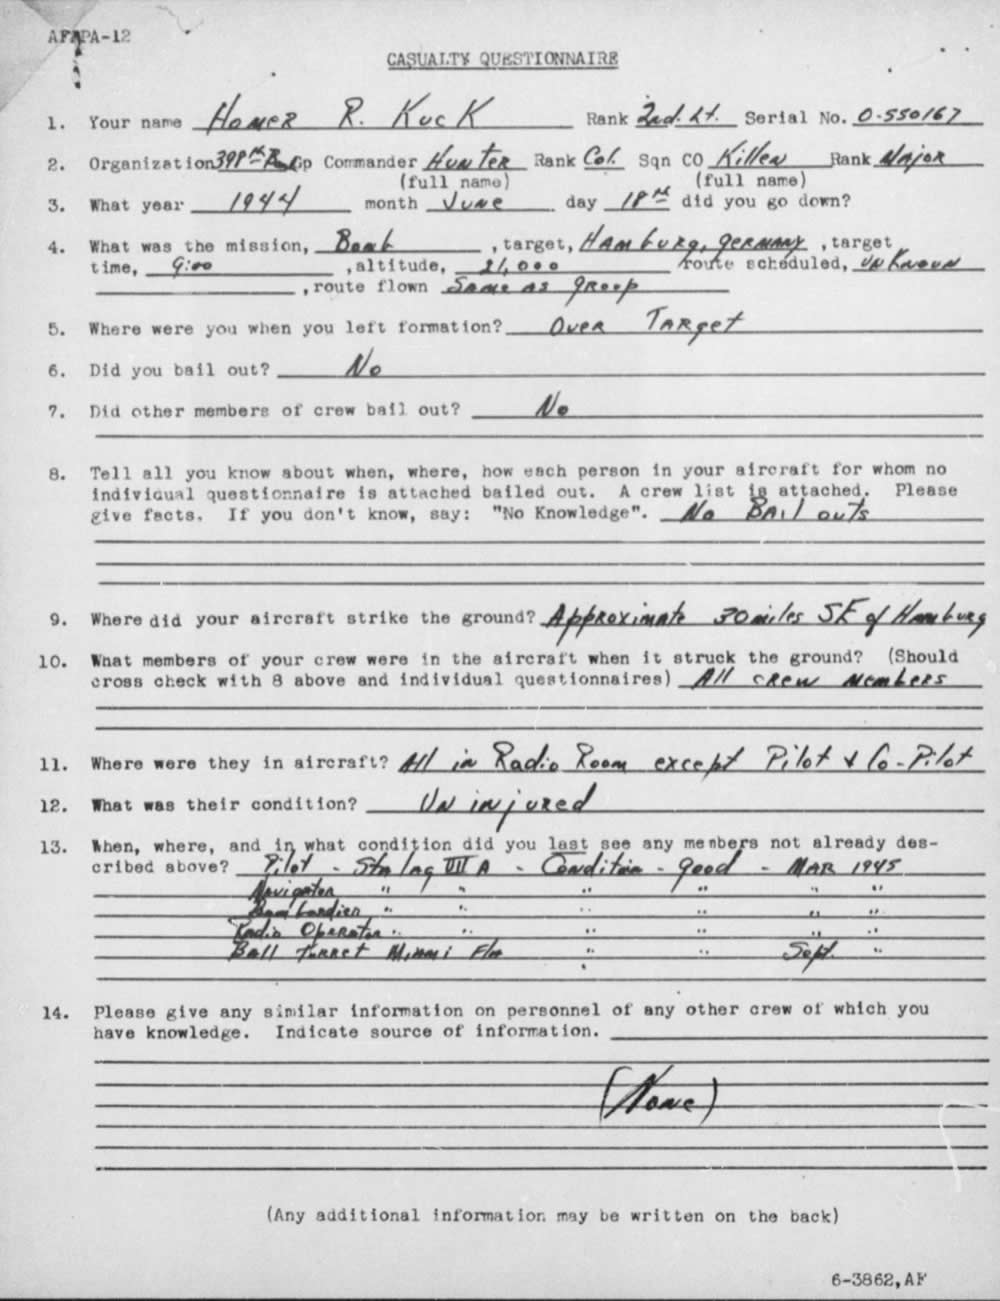 Casualty questionnaire report by Homer Kuck 